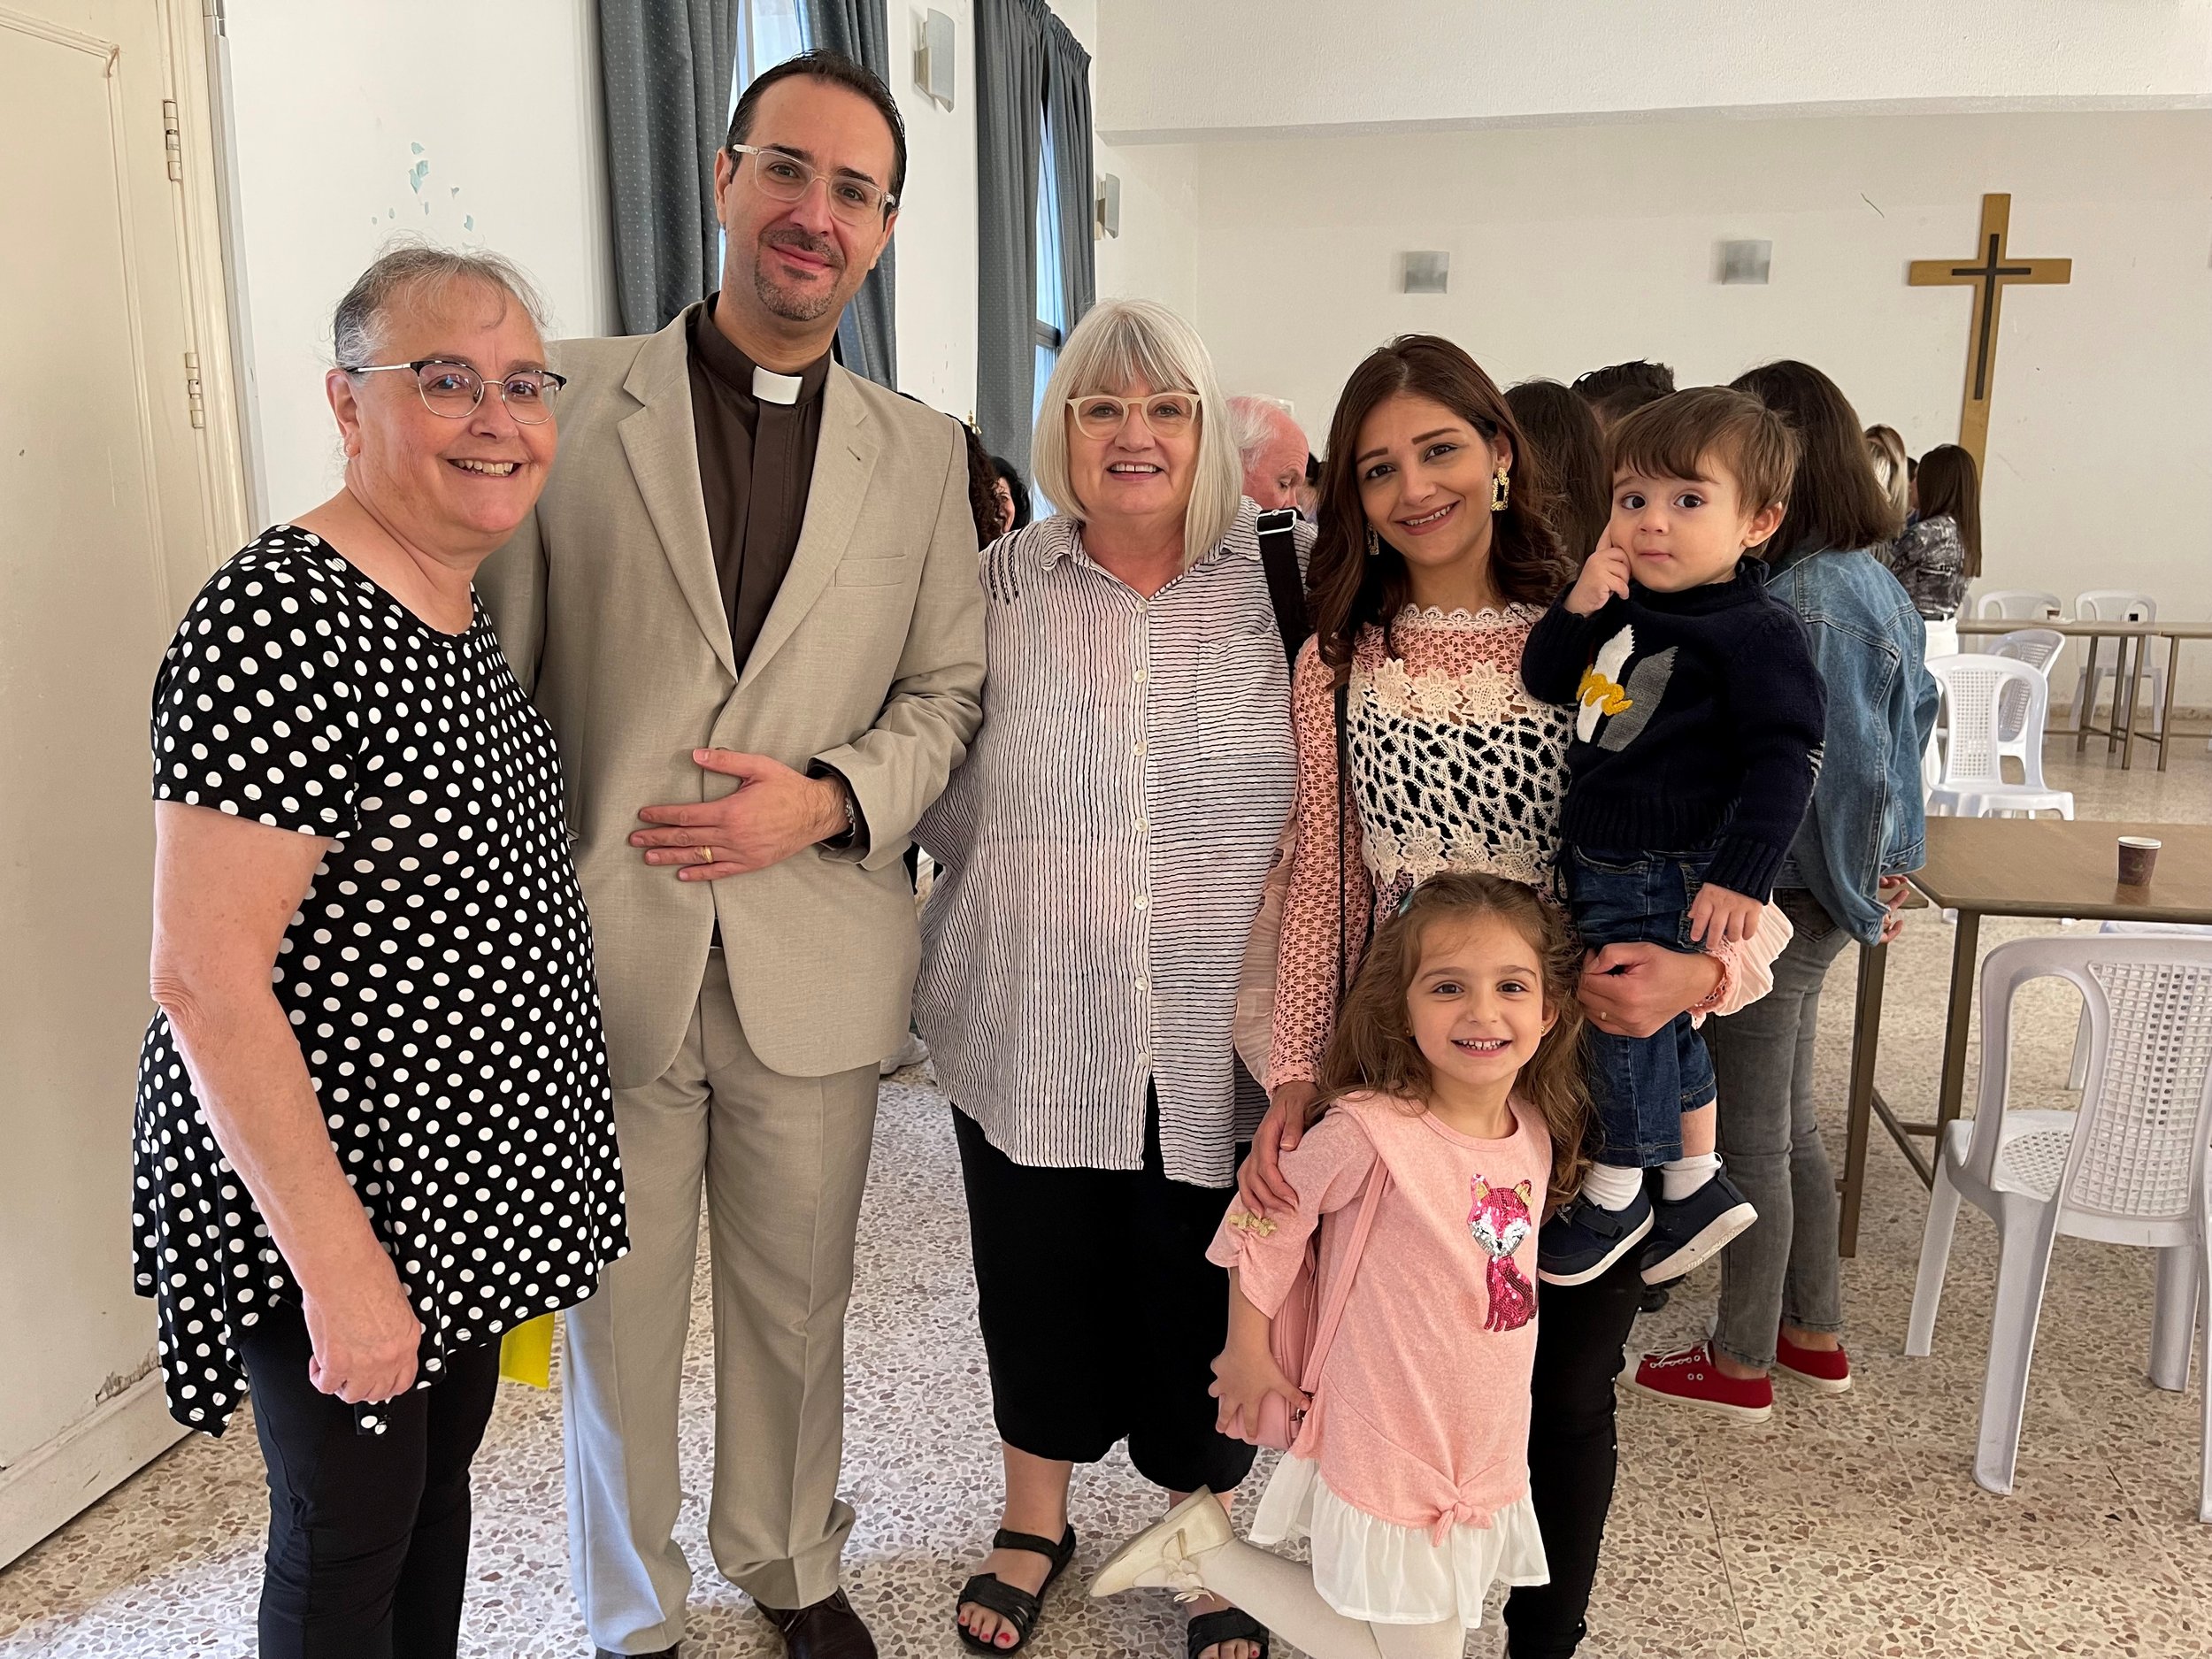  Julie and Marilyn with Rev Yacoub “Jake” Sabbagh, Grace and their two children 